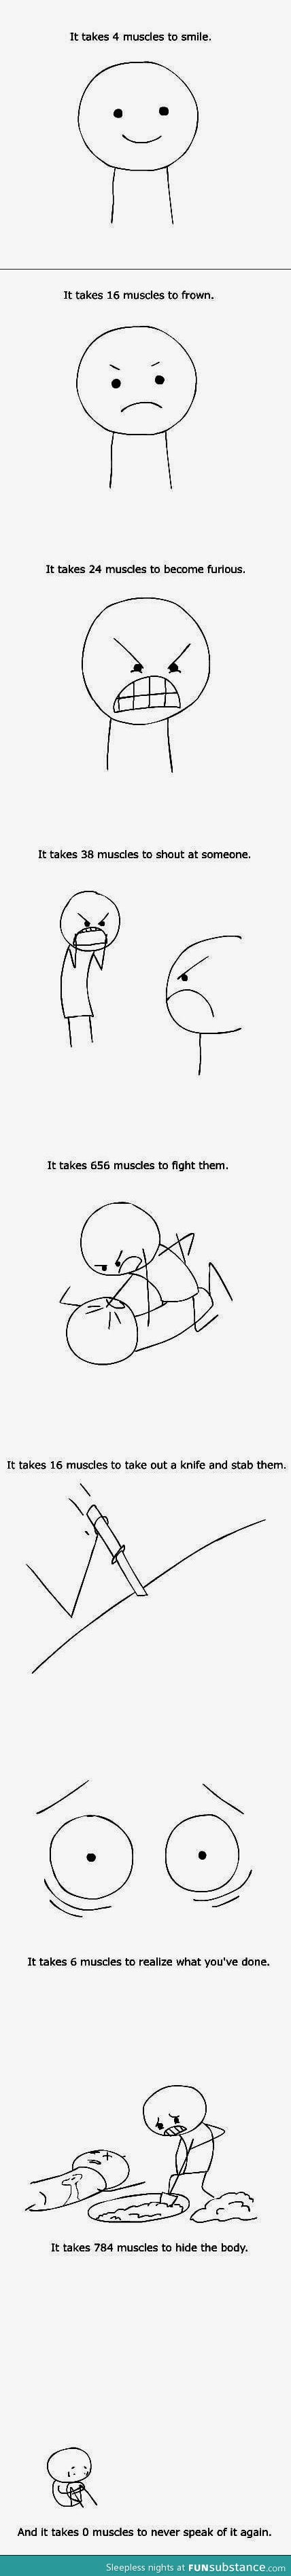 When muscles are involved